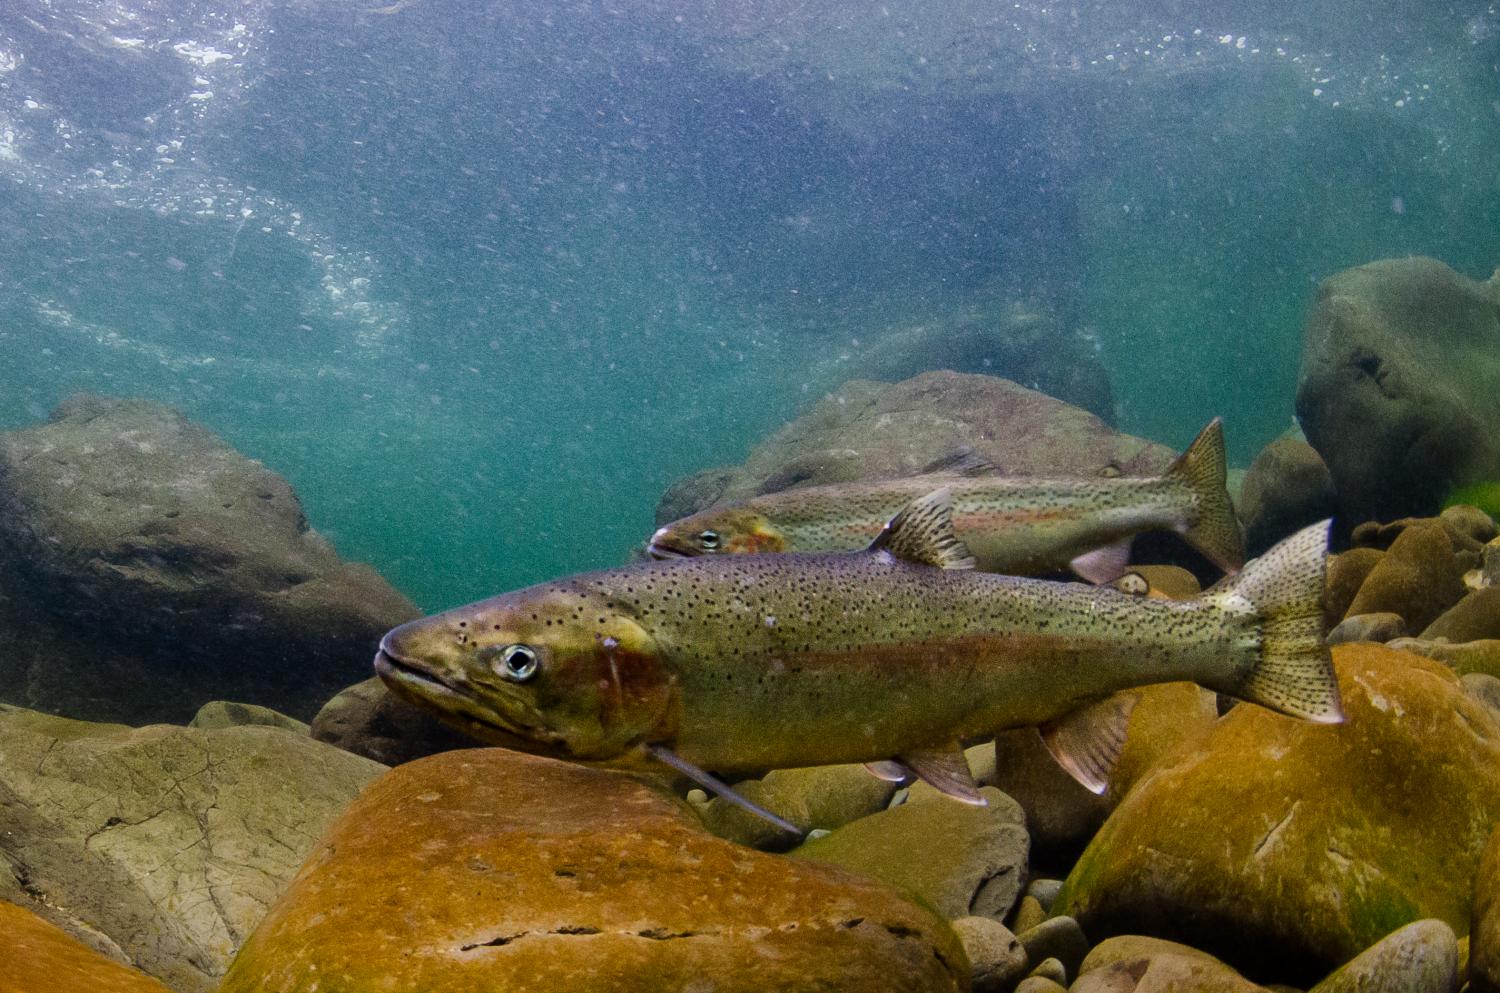 Steelhead trout population declines linked with poor survival of